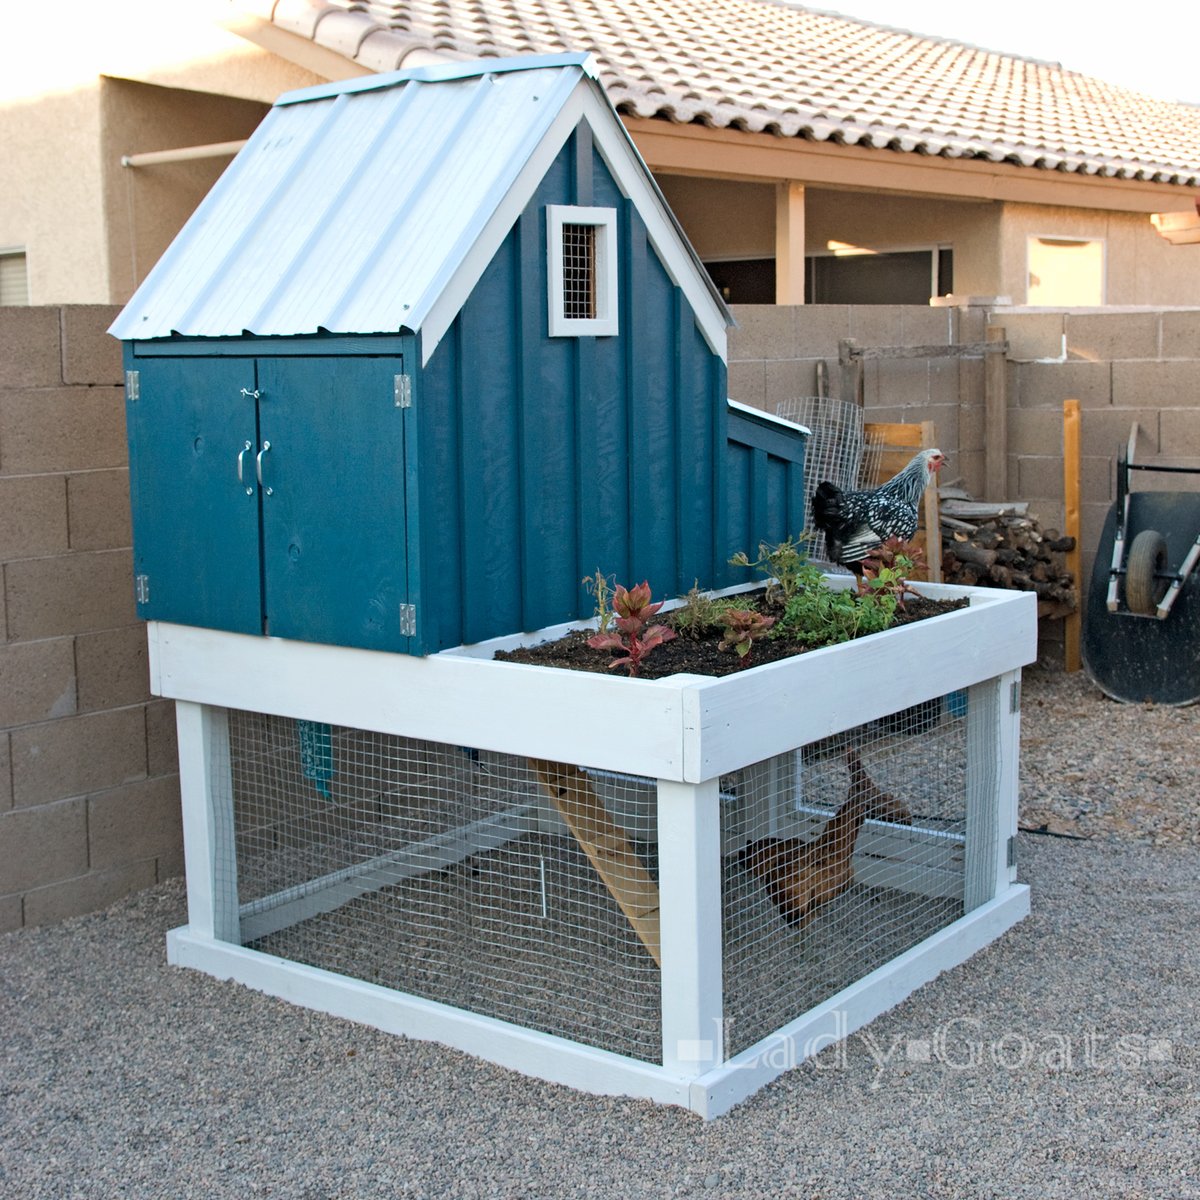 chicken coop teal with chickens